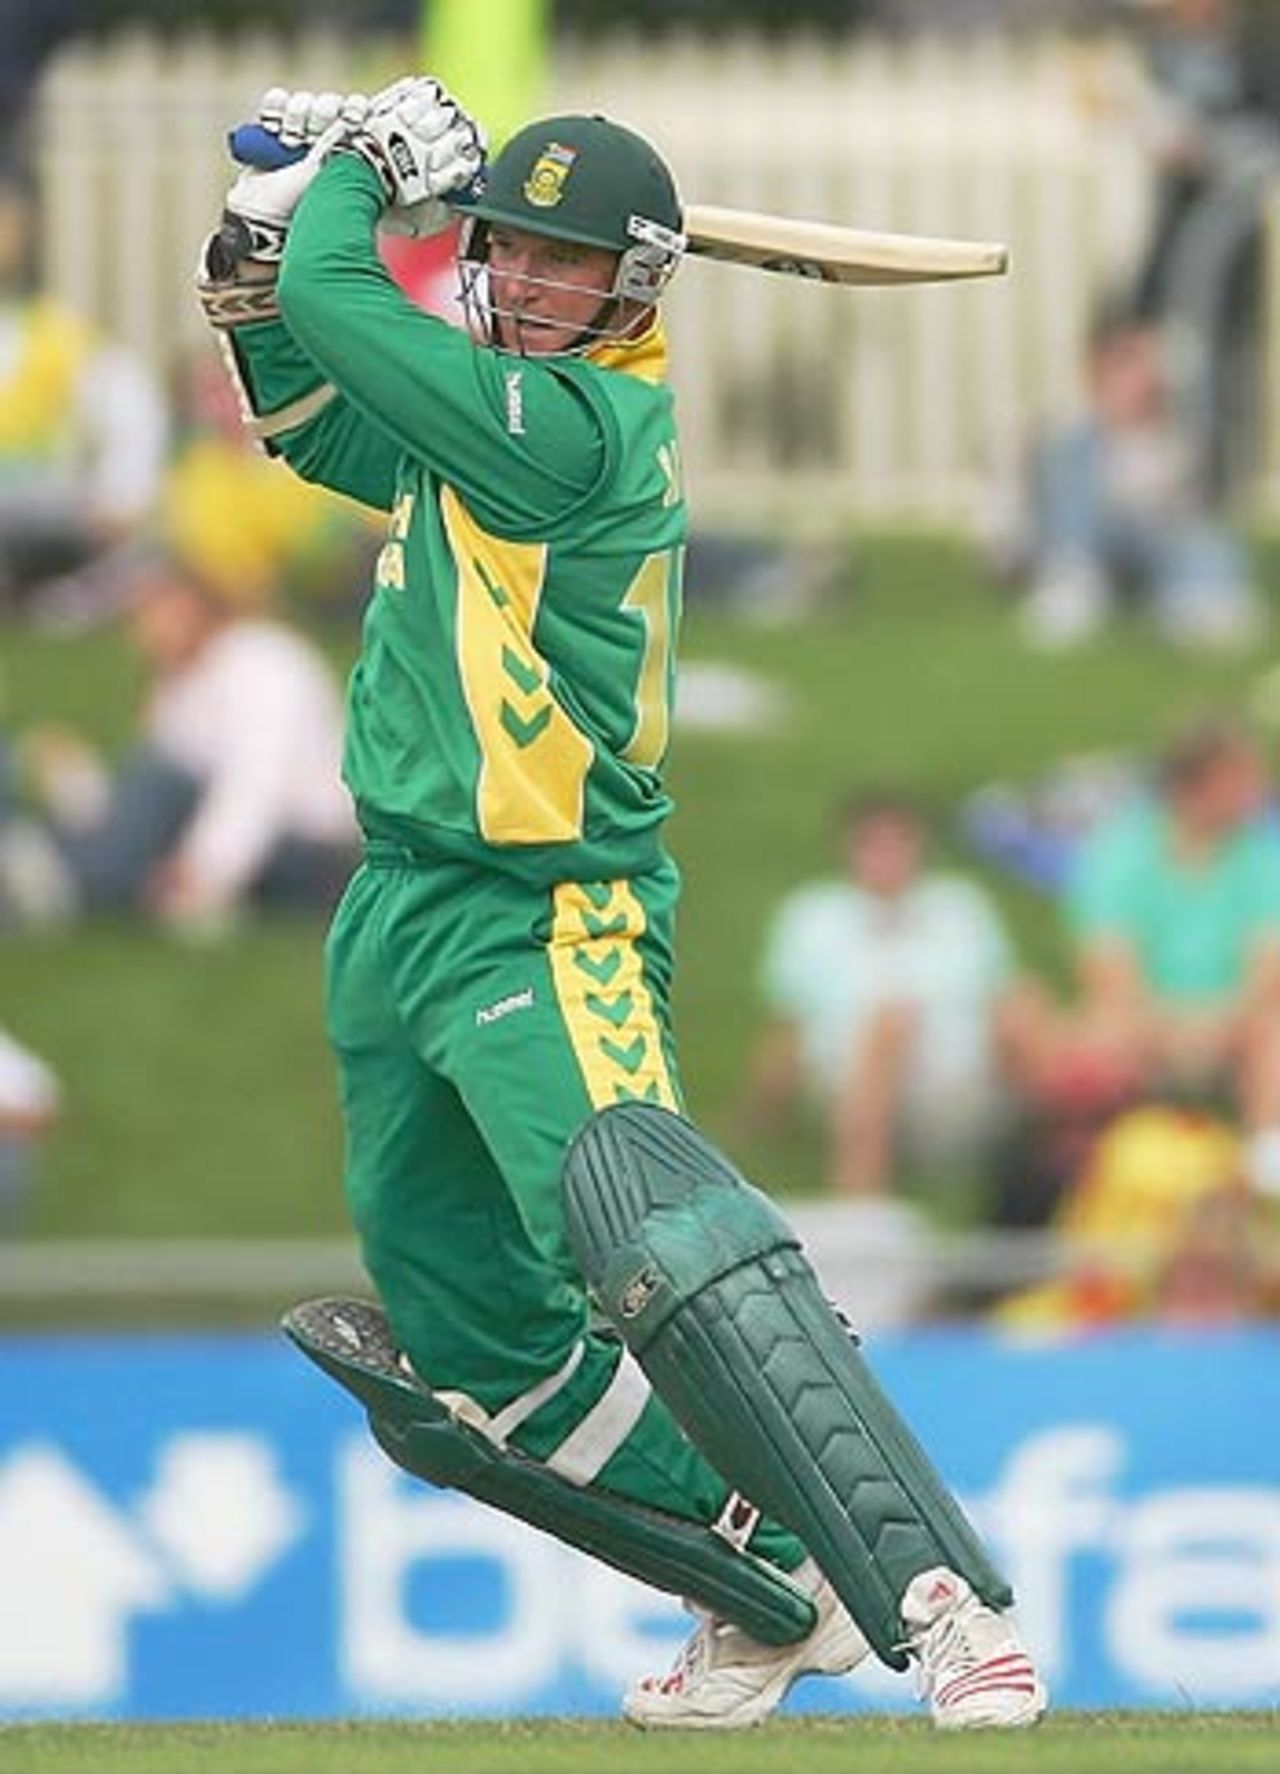 Graeme Smith will be hoping for a big effort from his South Africa